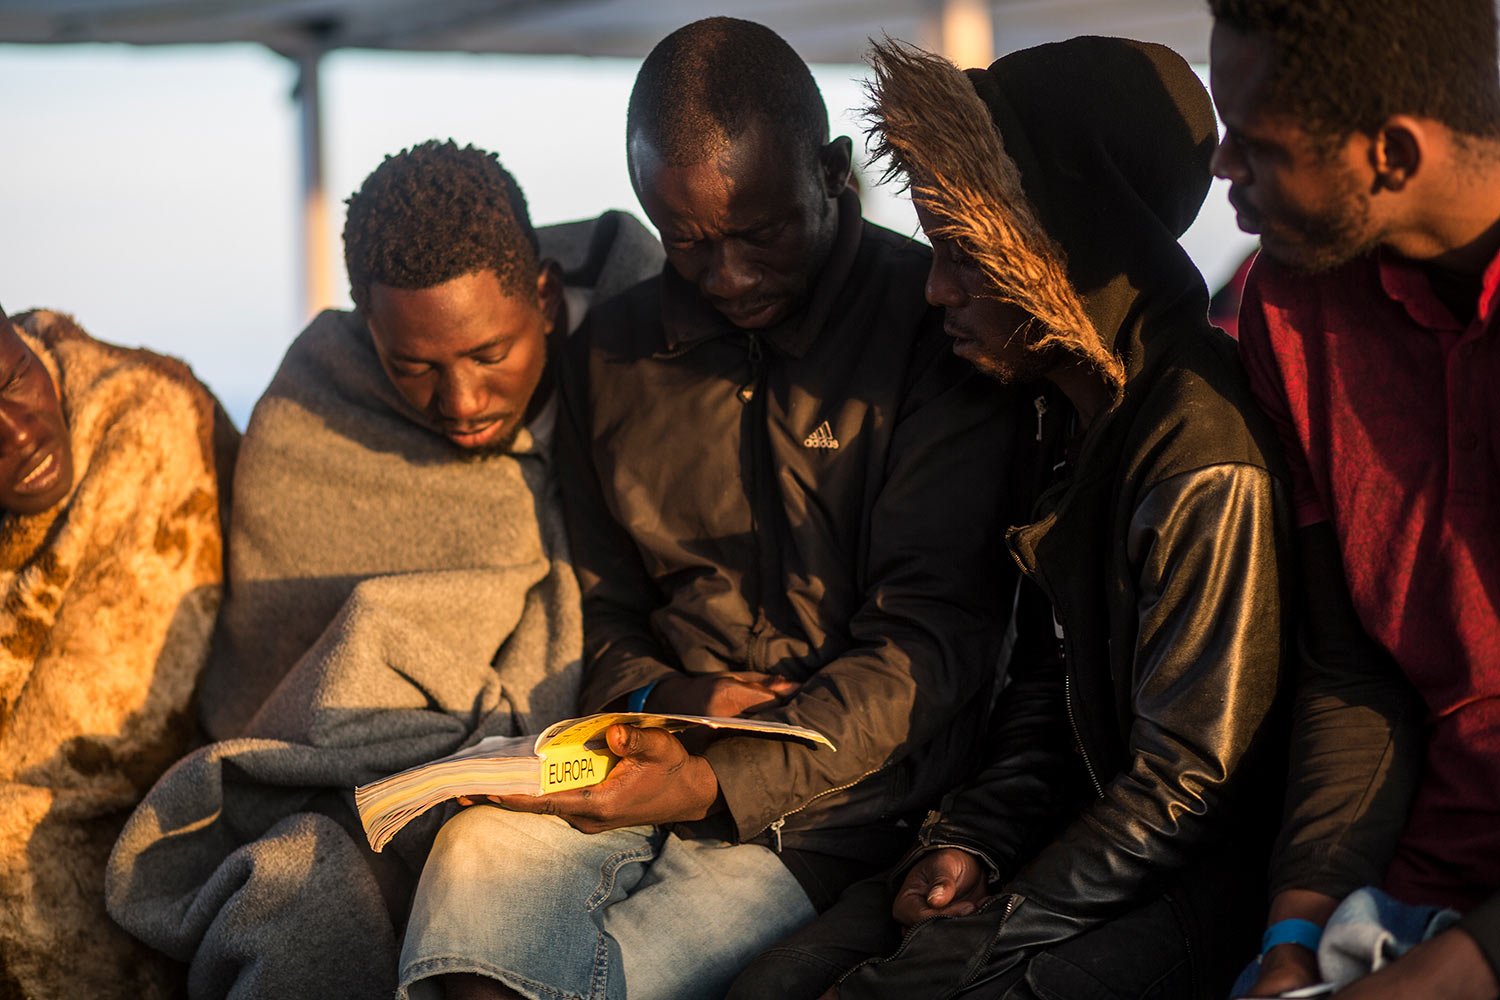  Migrants read a book about Europe on the deck of the Open Arms vessel after been rescued by the Spanish NGO Pro Activa Open Arms, about 40 miles (64 kms) from the Spanish coasts, Oct. 11, 2018. (AP Photo/Javier Fergo) 